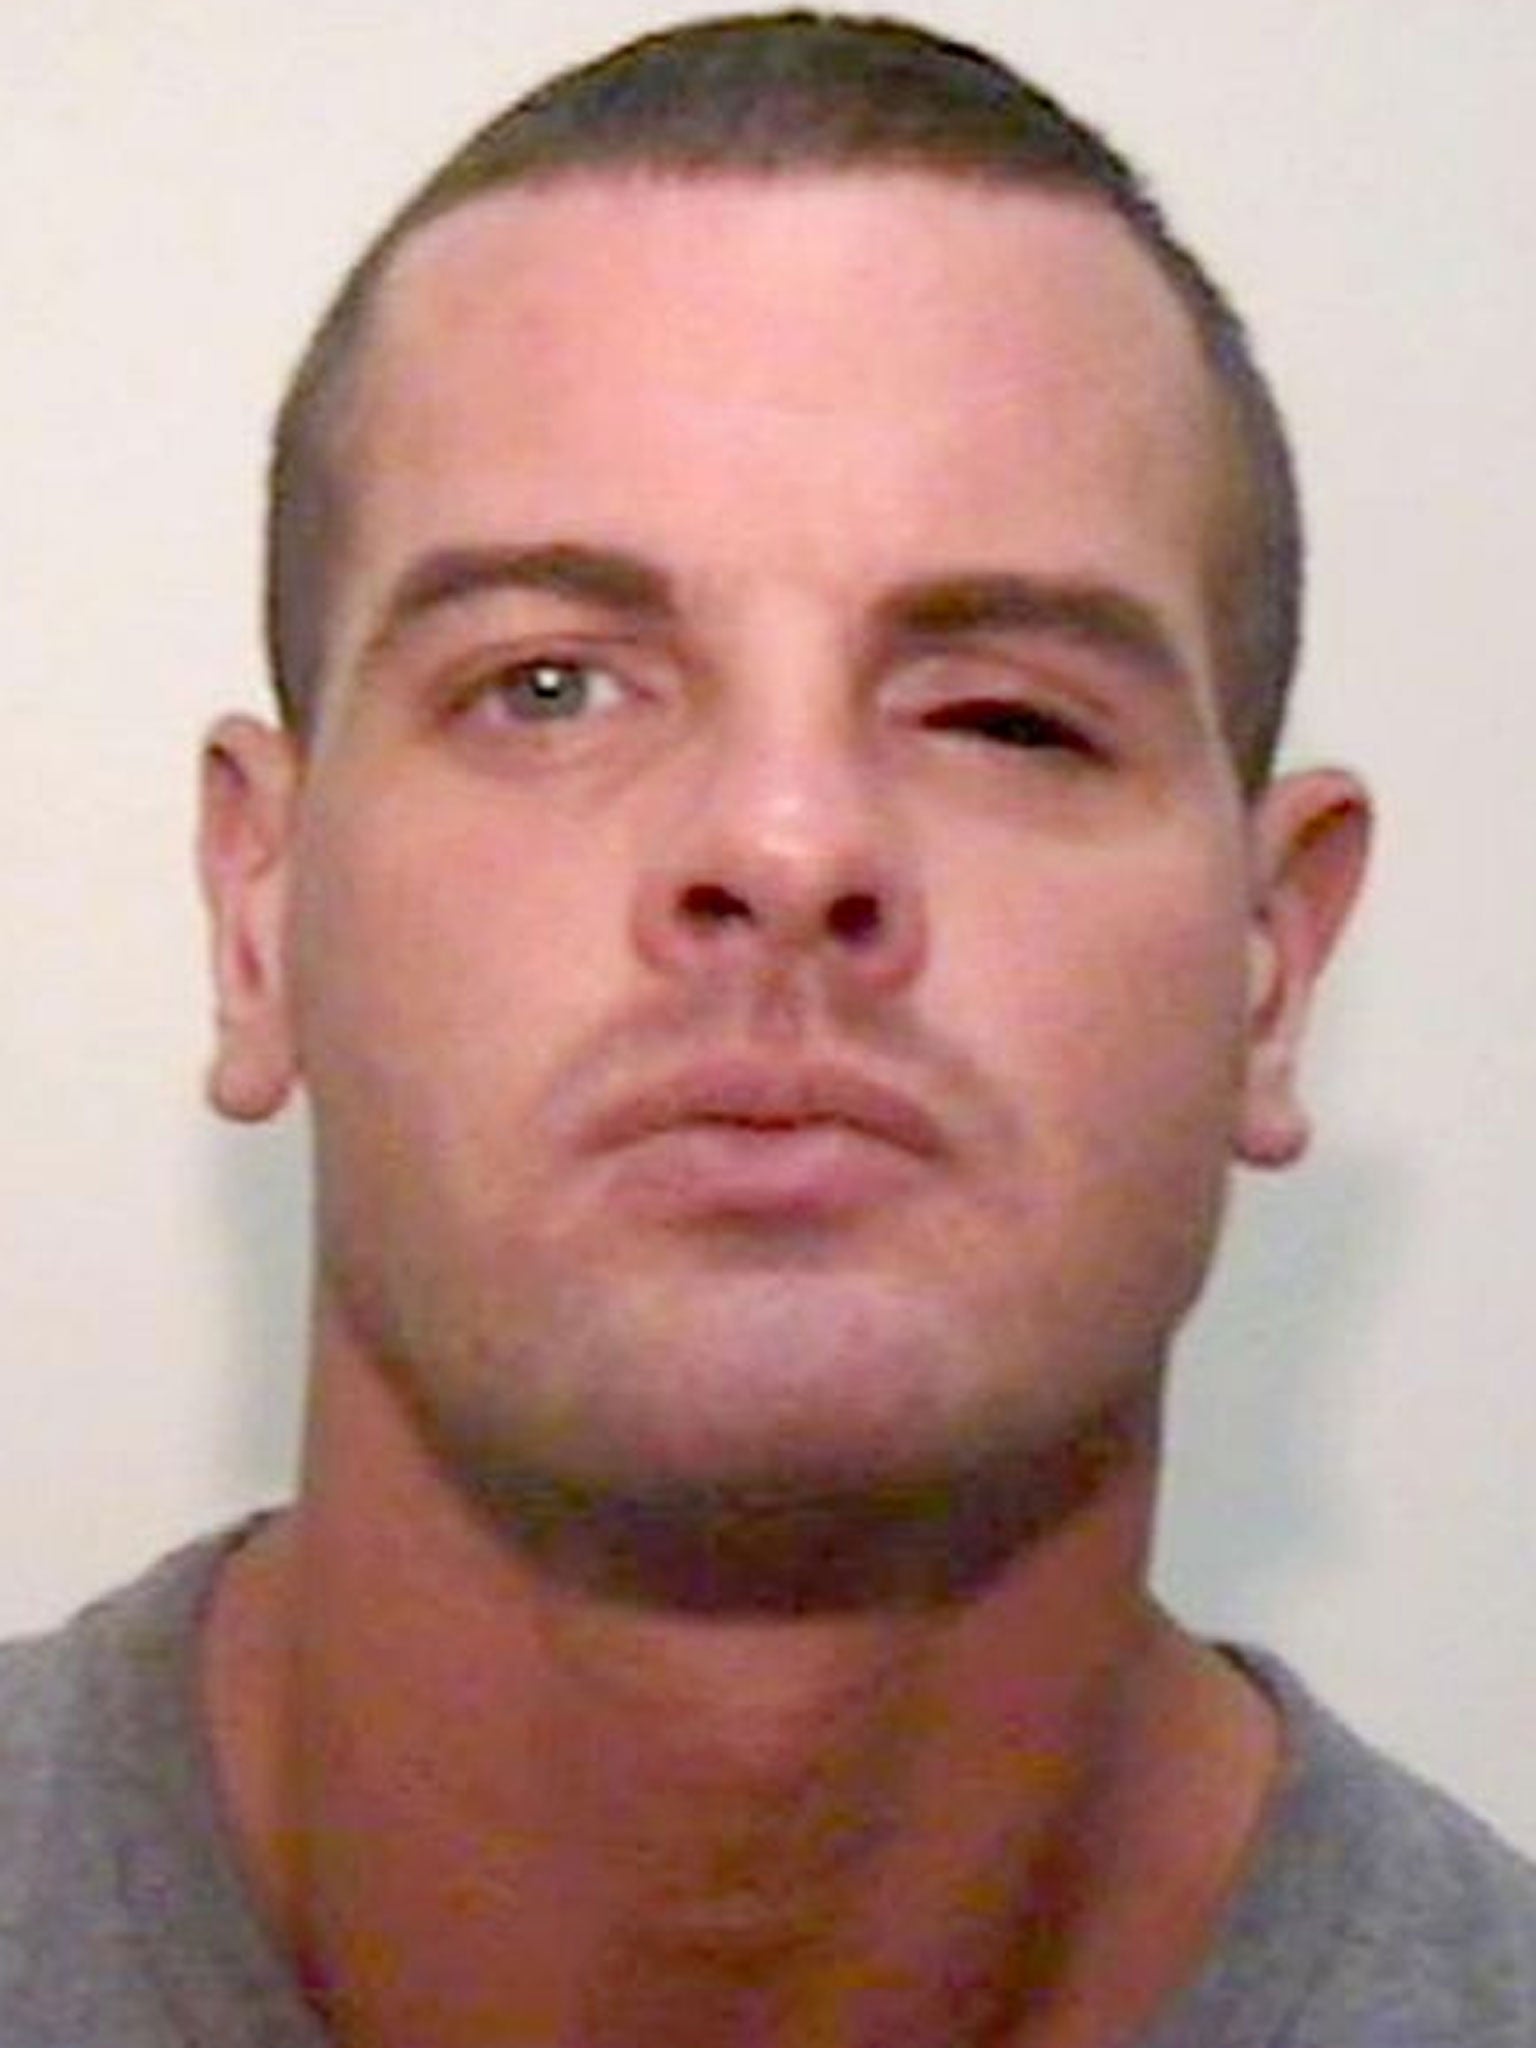 Dale Cregan is accused of four murders, including those of PCs
Nicola Hughes and Fiona Bone